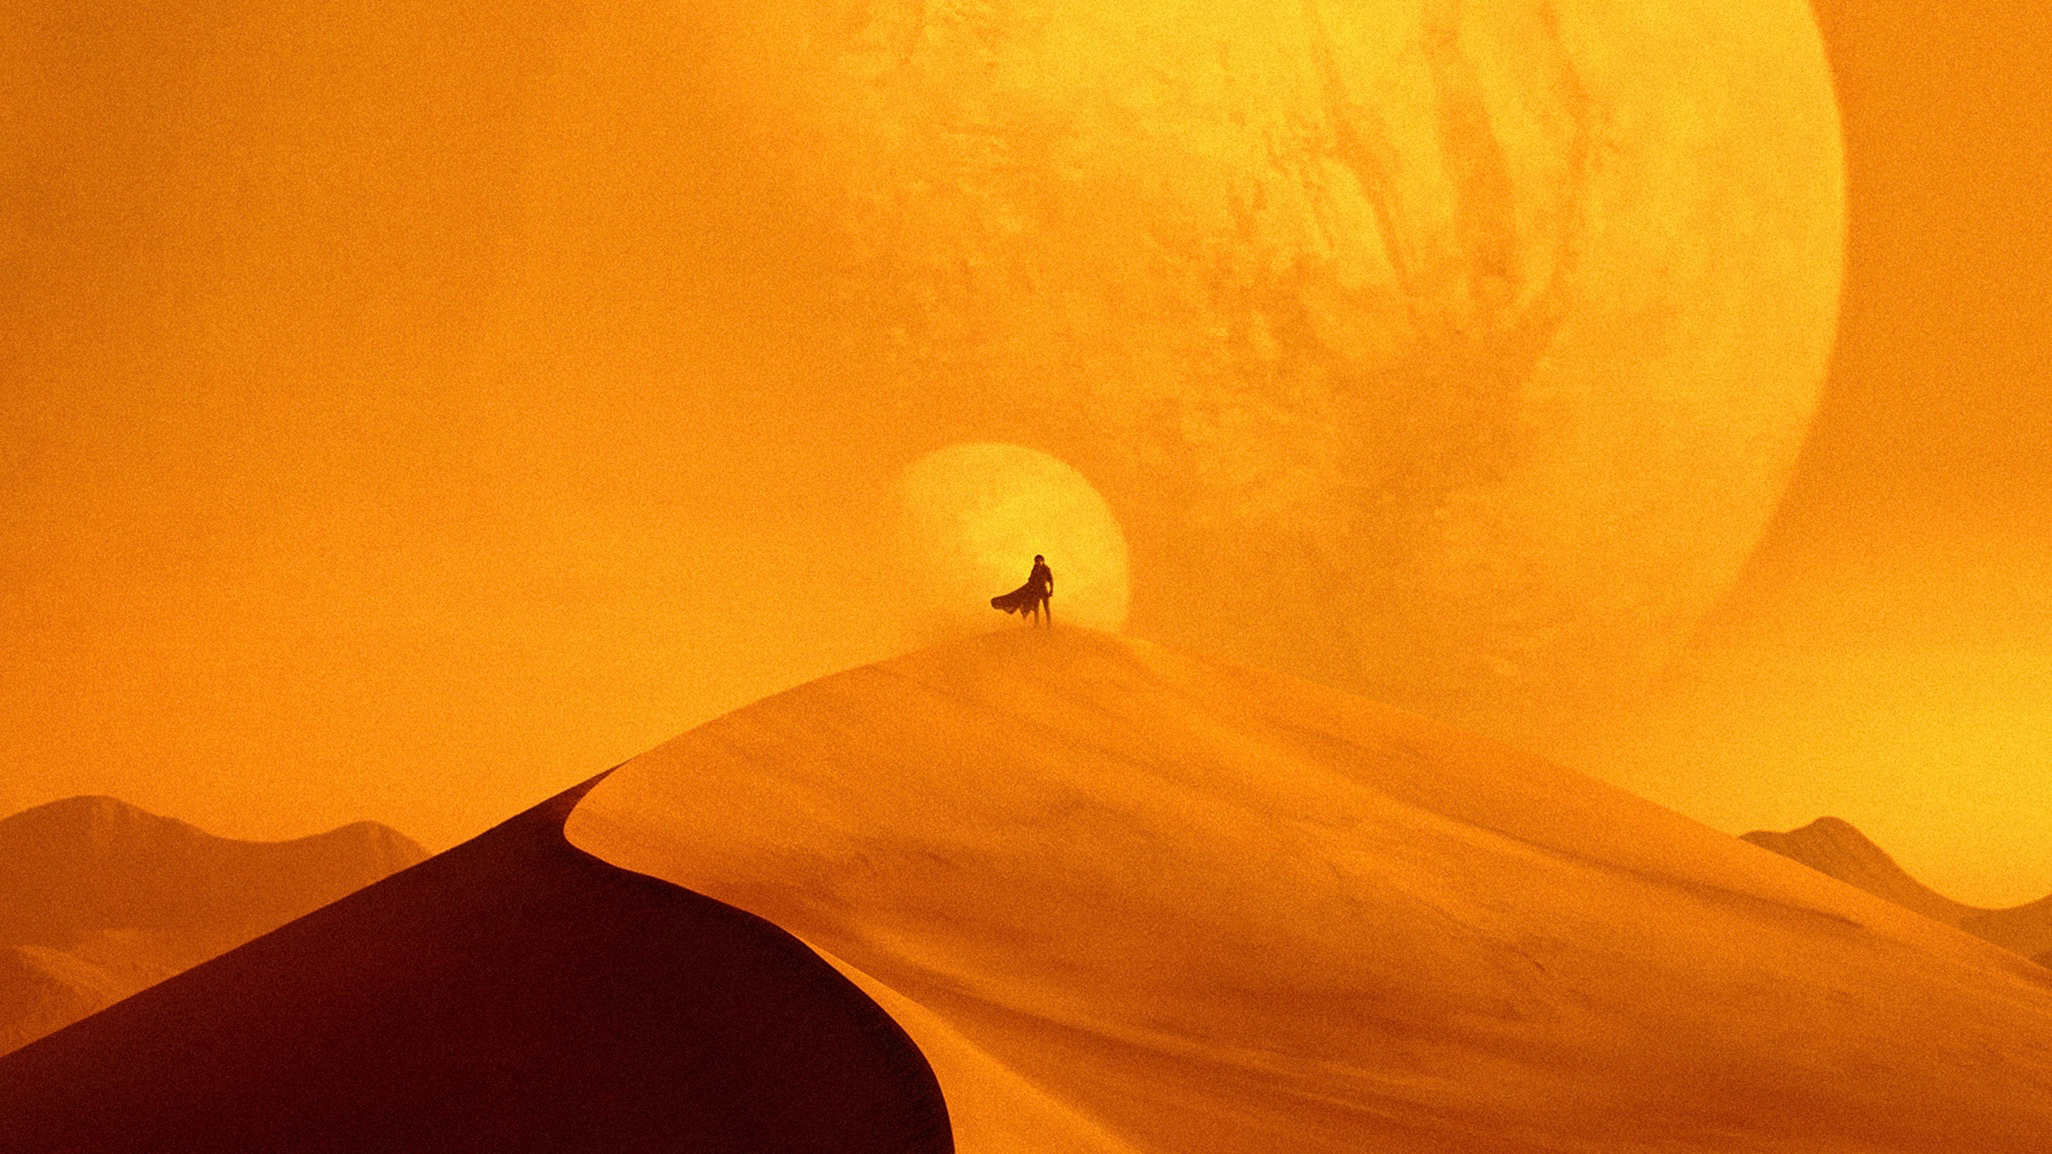 Best Mobile Dune (2021) Backgrounds